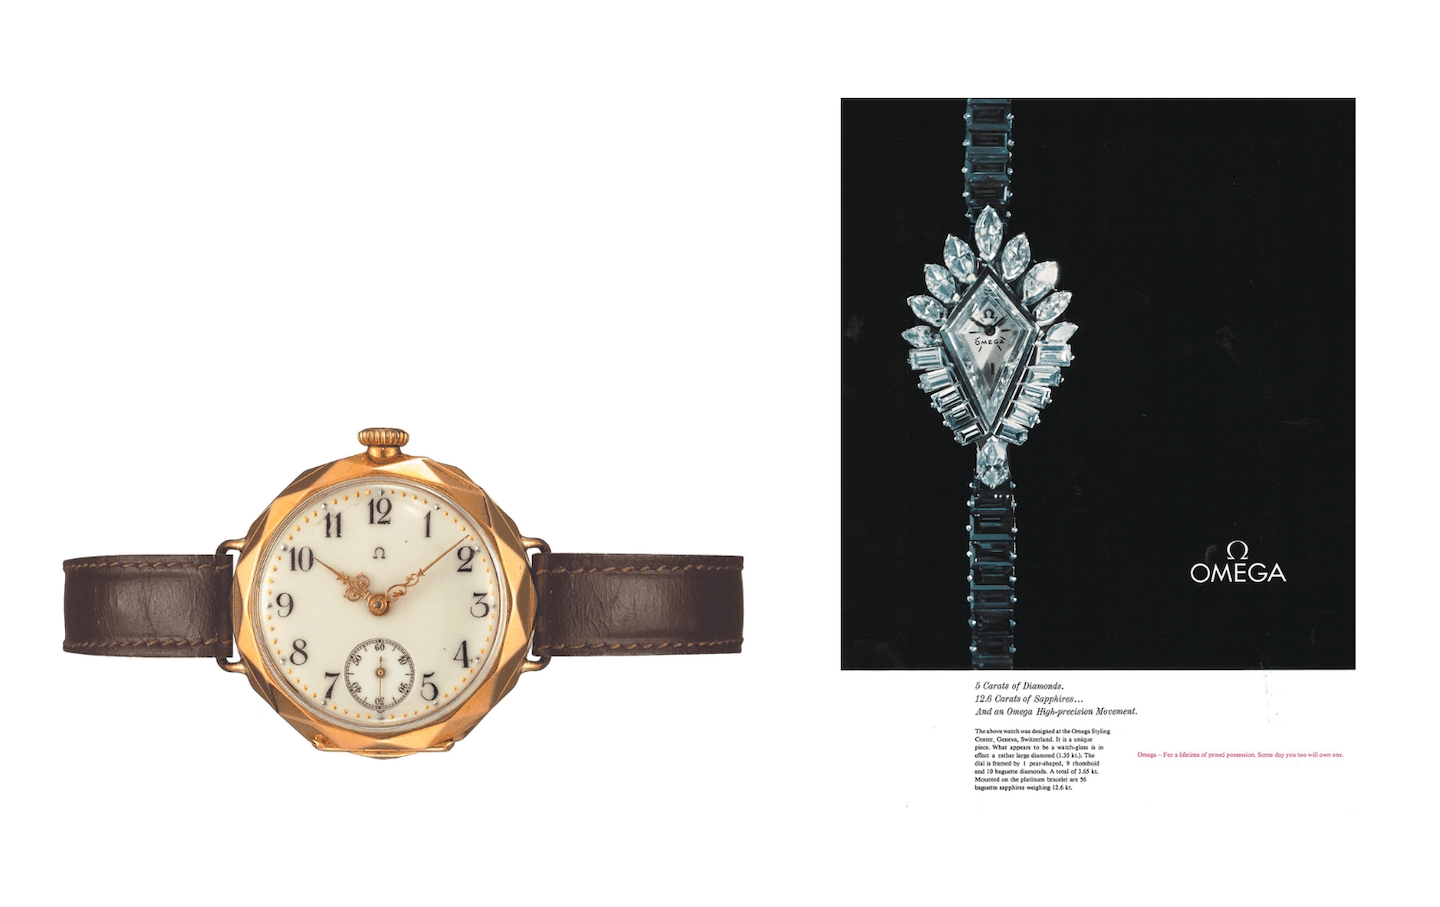 Omega ladies wrist watch from 1906 (L), Omega 1959 advertisement (R)